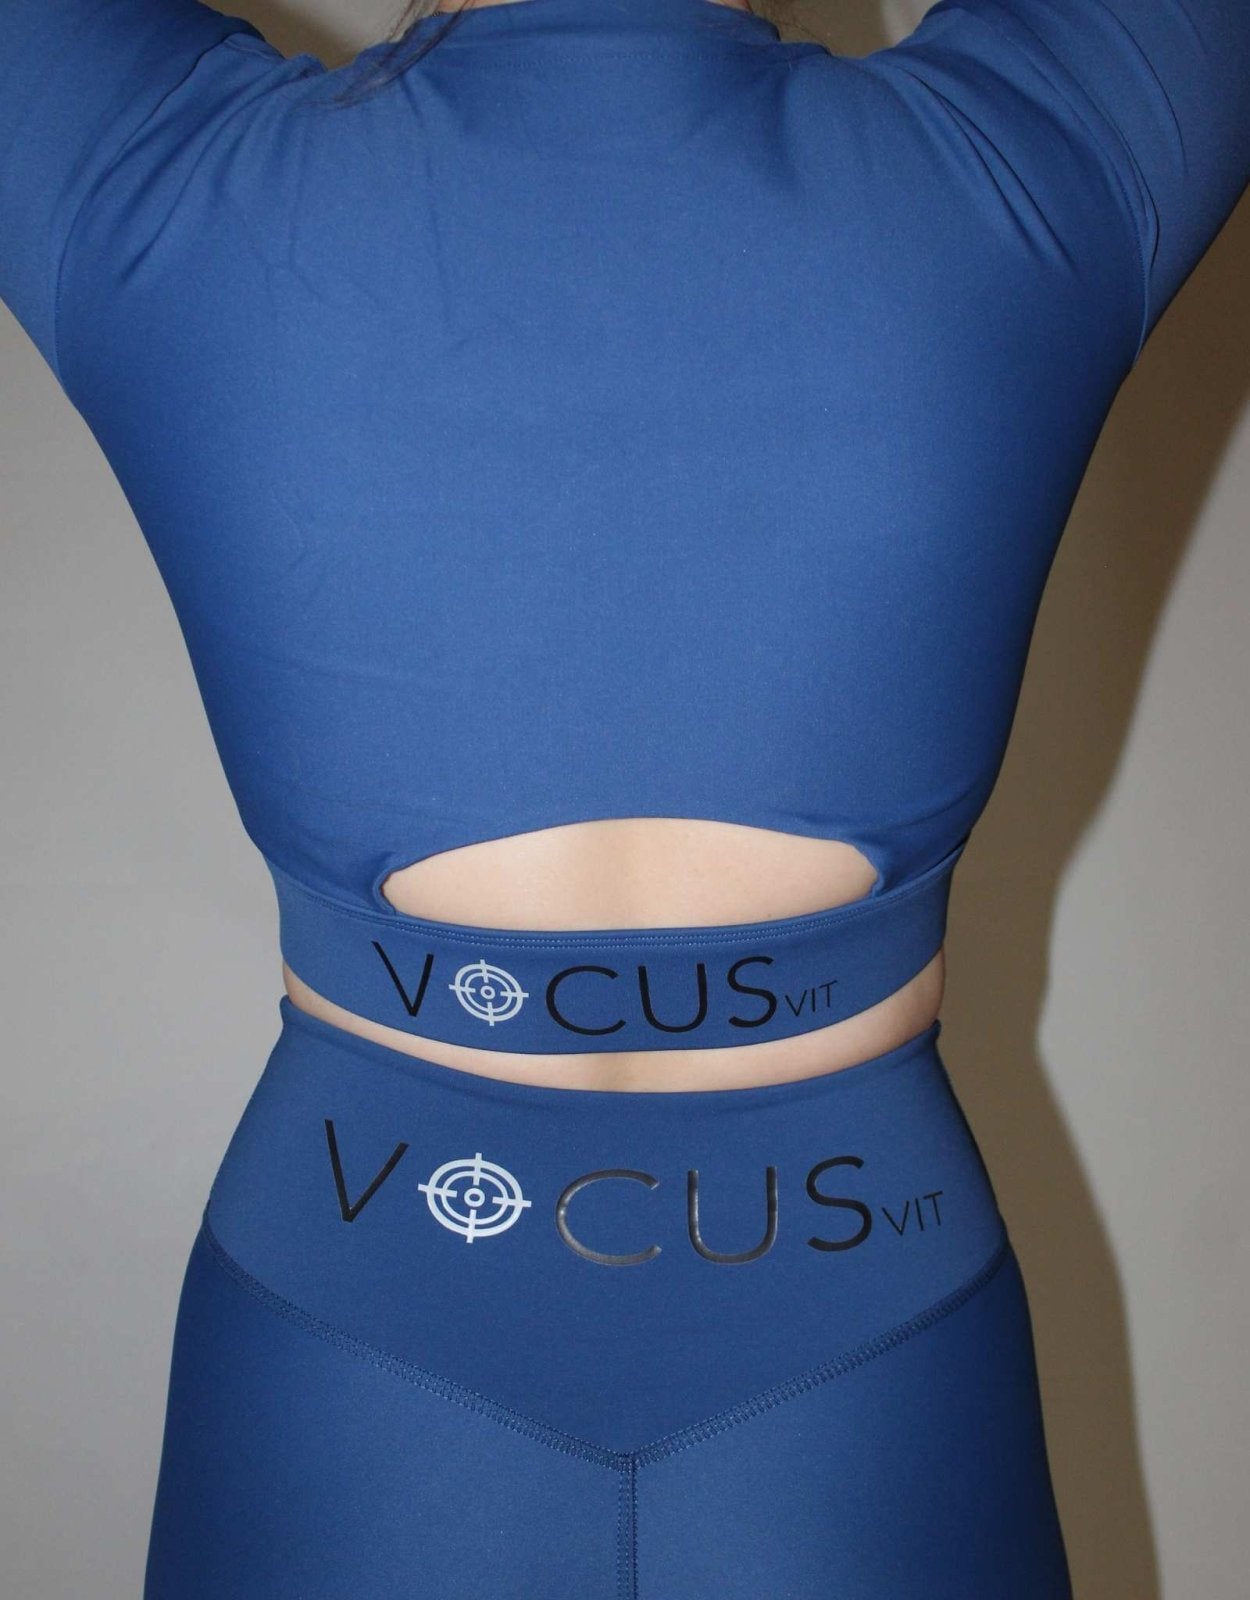 Back of the long sleeve top from Vocus vit in blue. arch cut out in top and big logo at back. Vocus vit is a sustainable women's activewear brand that uses recycled materials and ethical manufacturing. Based in Northern Ireland. Shipping worldwide.Sizes XS (8) TO XXL (18).